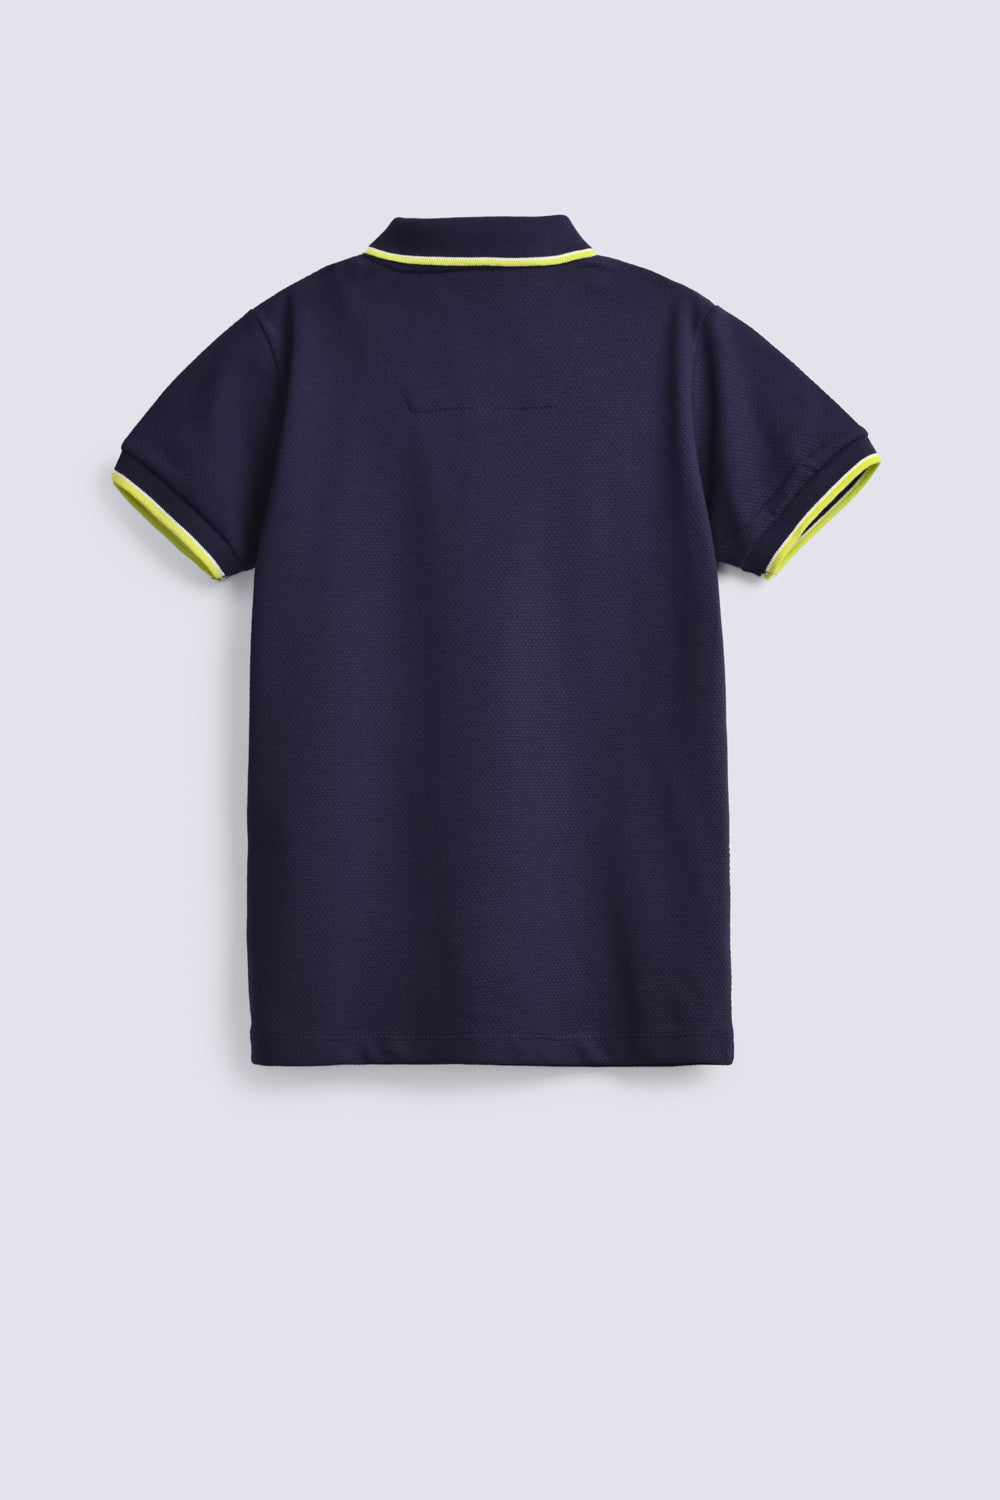 BOYS SPECIAL KNIT POLO – Breakout